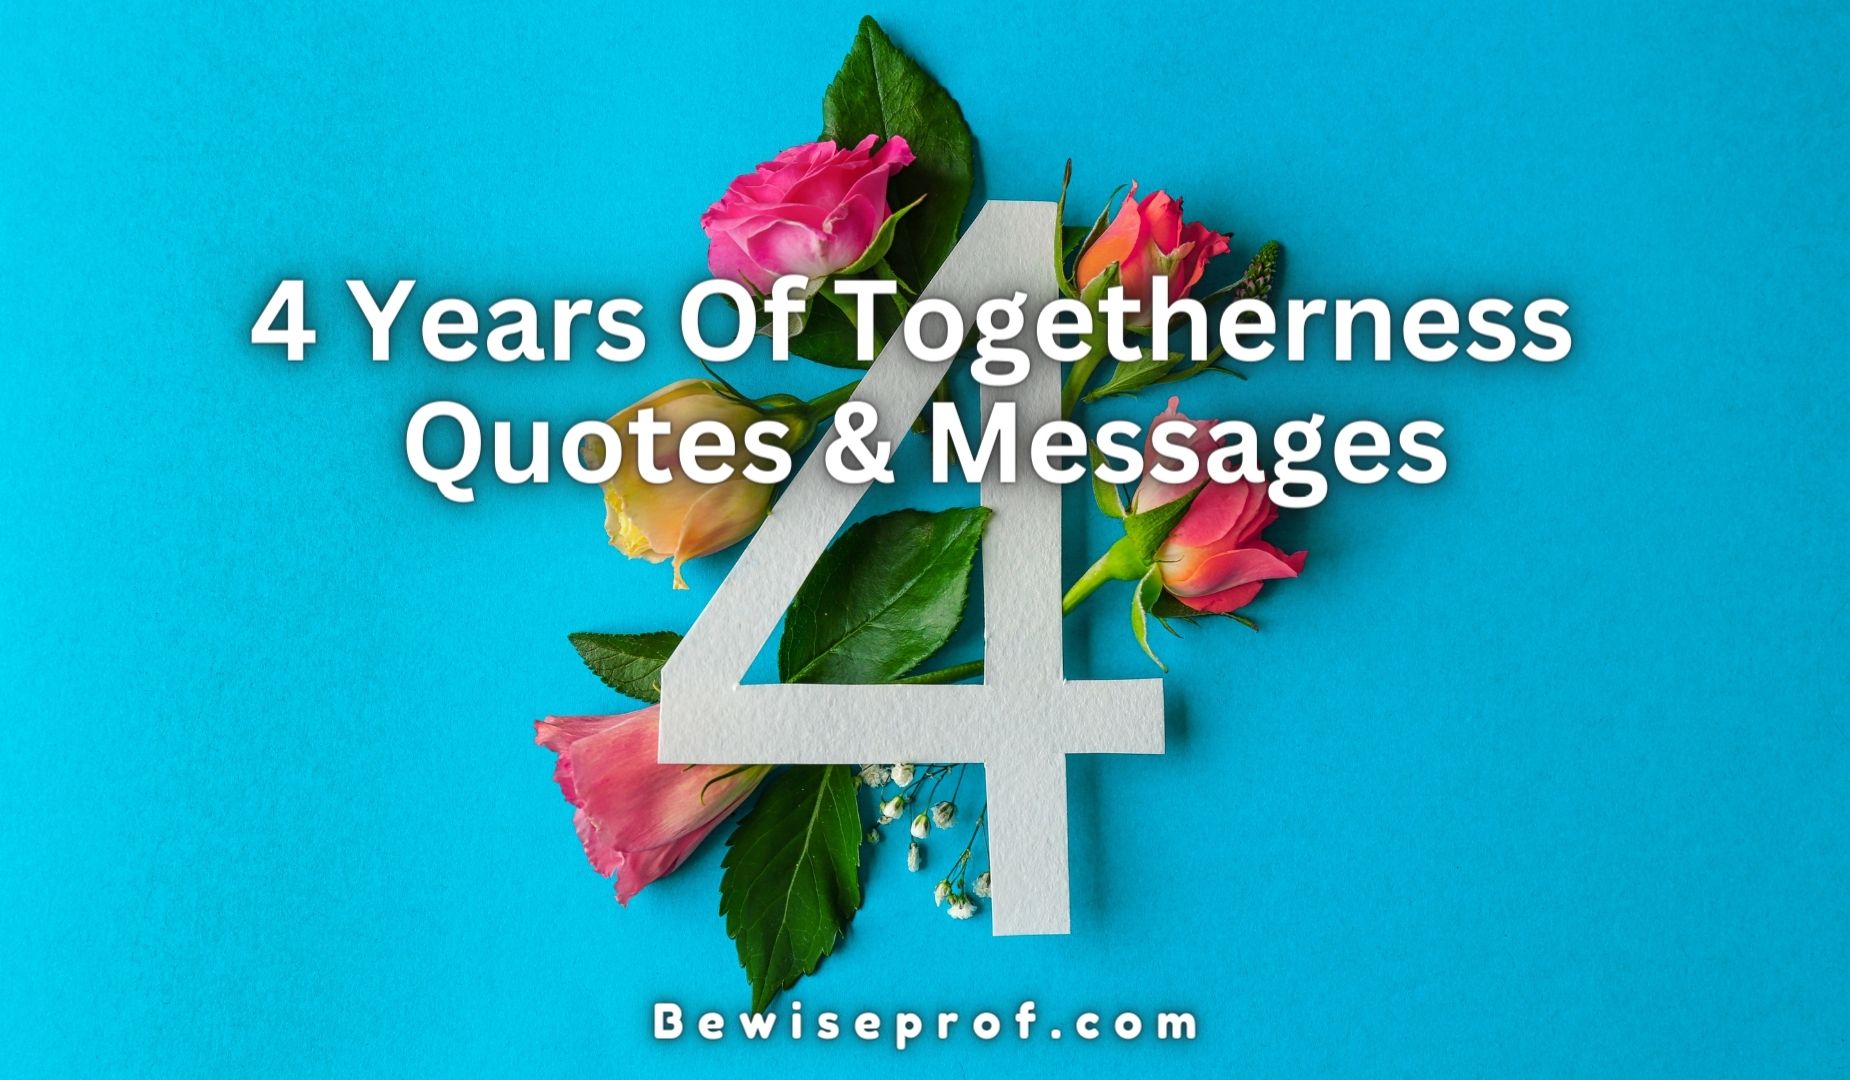 4 Years Of Togetherness Quotes And Messages